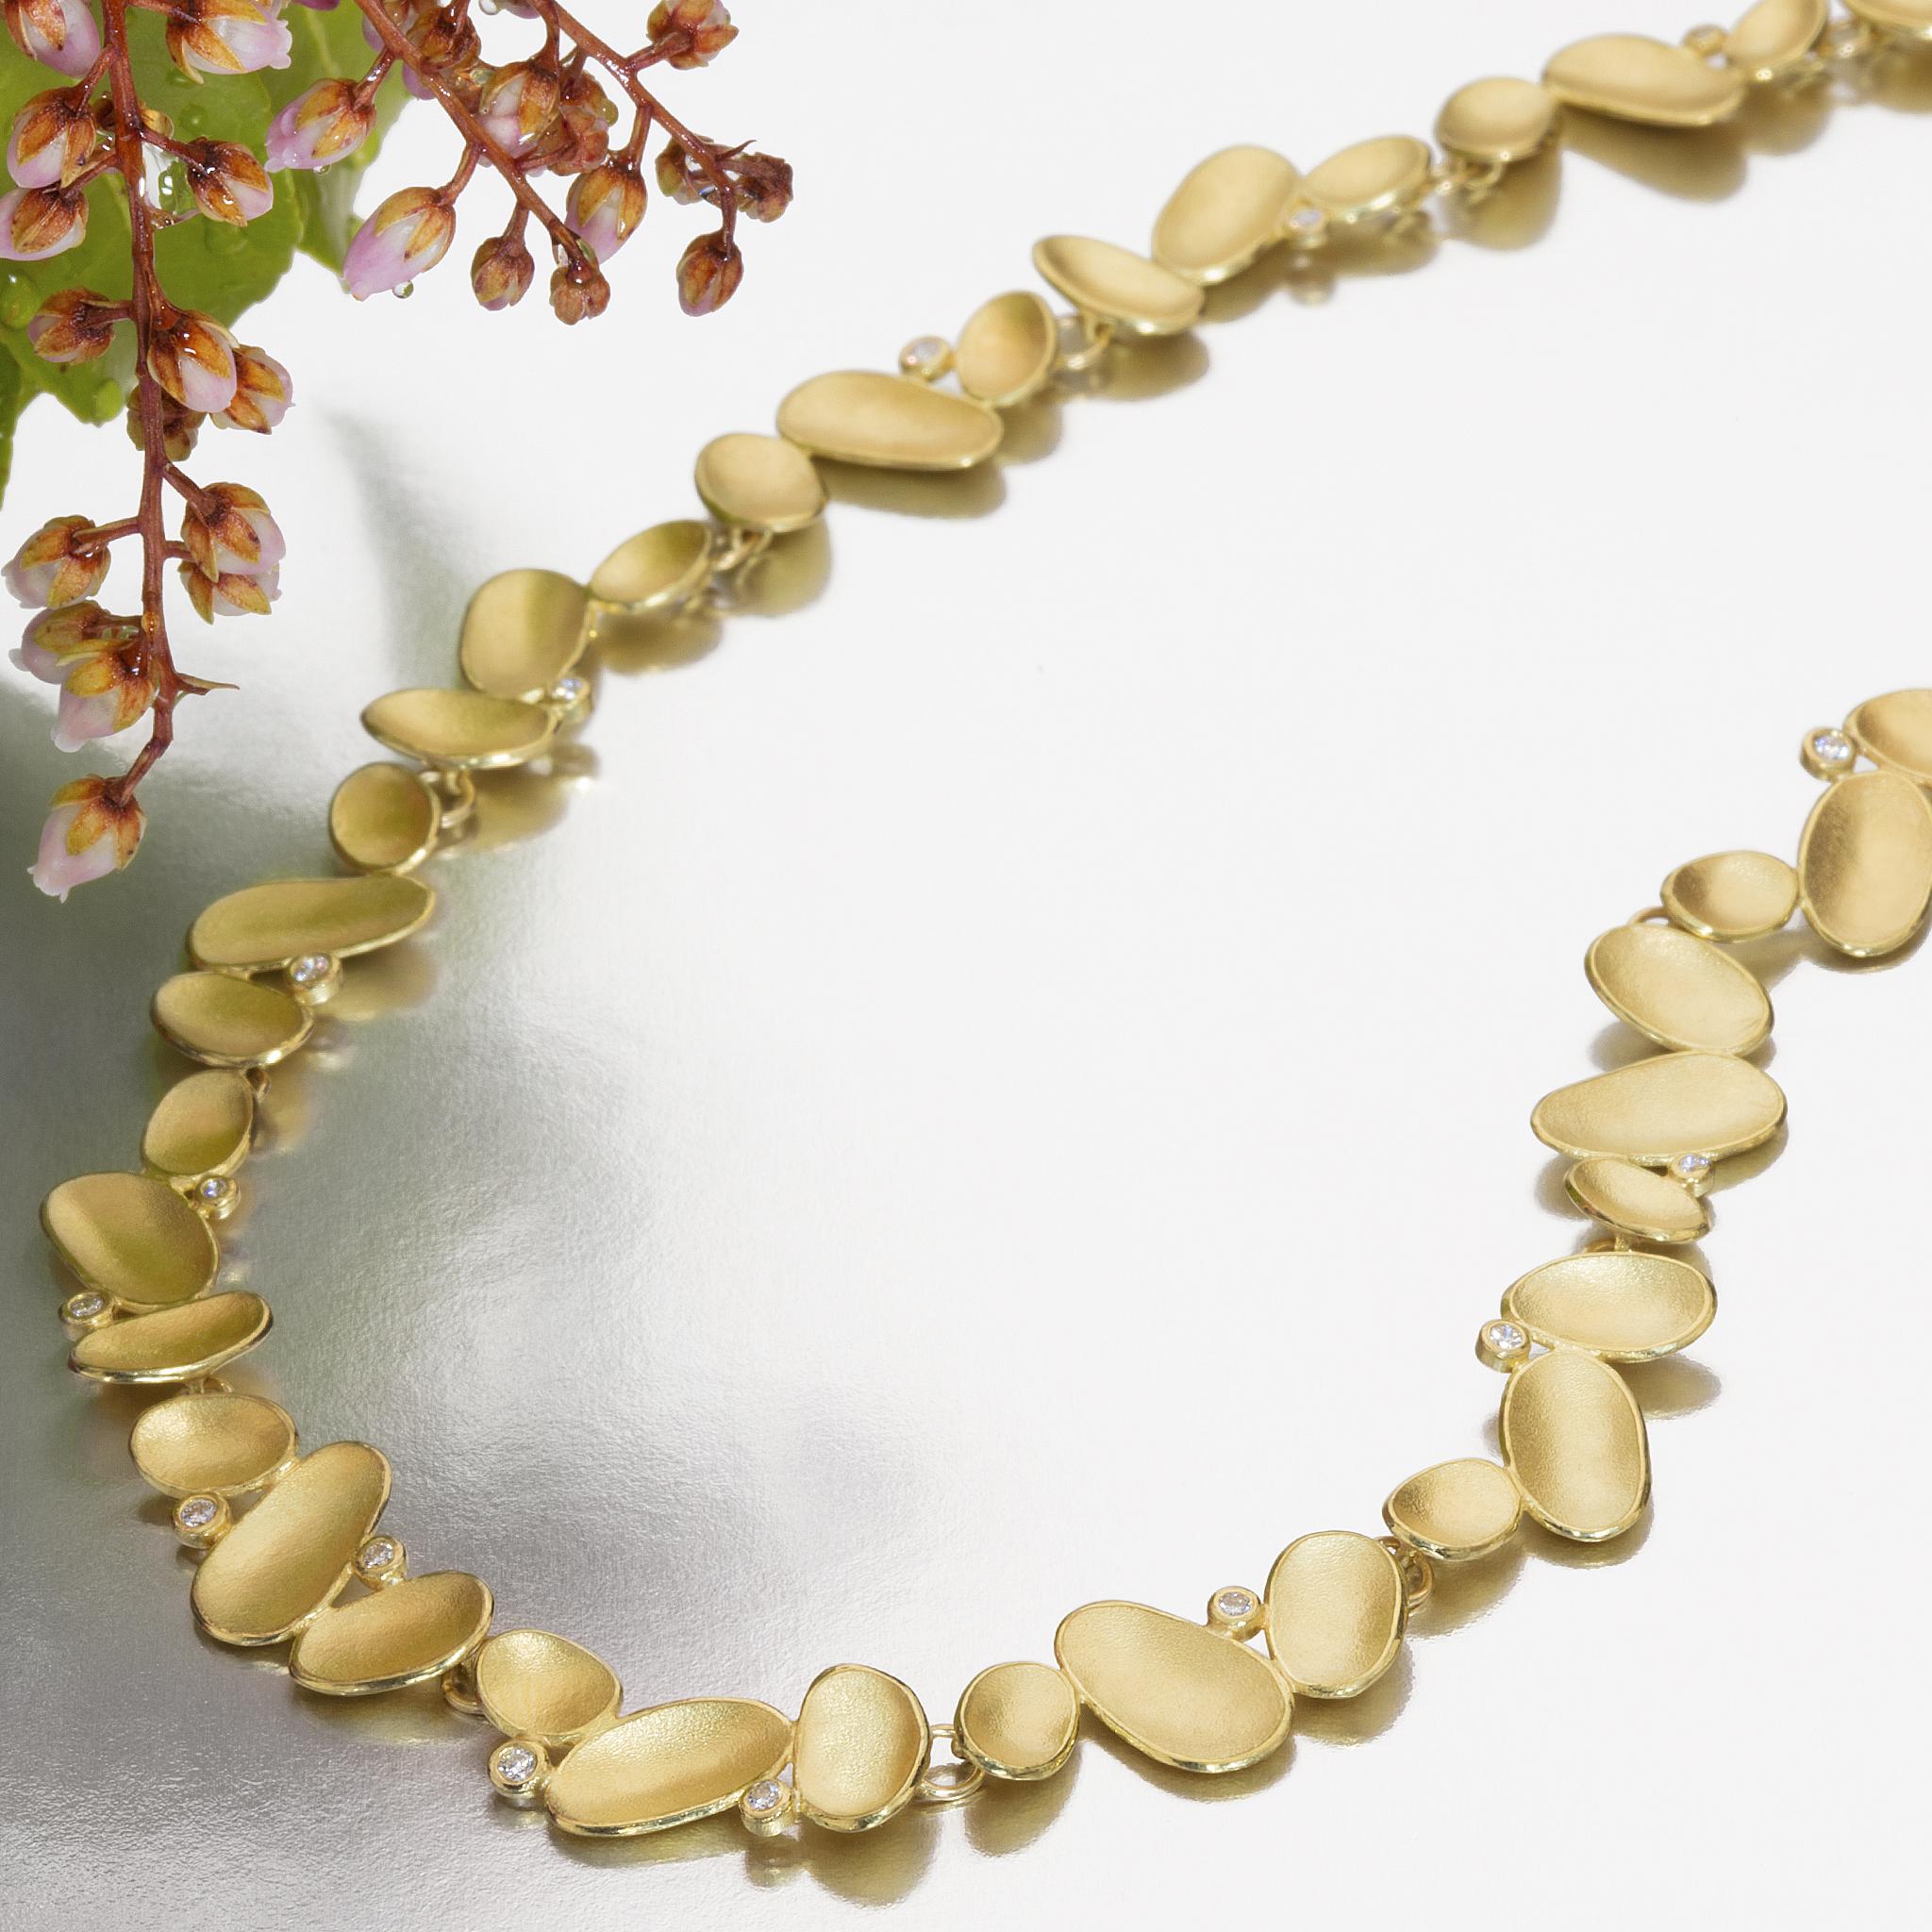 Golden Shells Necklace intricately hand-fabricated by acclaimed jewelry maker Barbara Heinrich in solid 18k yellow gold featuring 17.75 inches of individually formed golden shell elements clustered in groups of three, with each set connected from